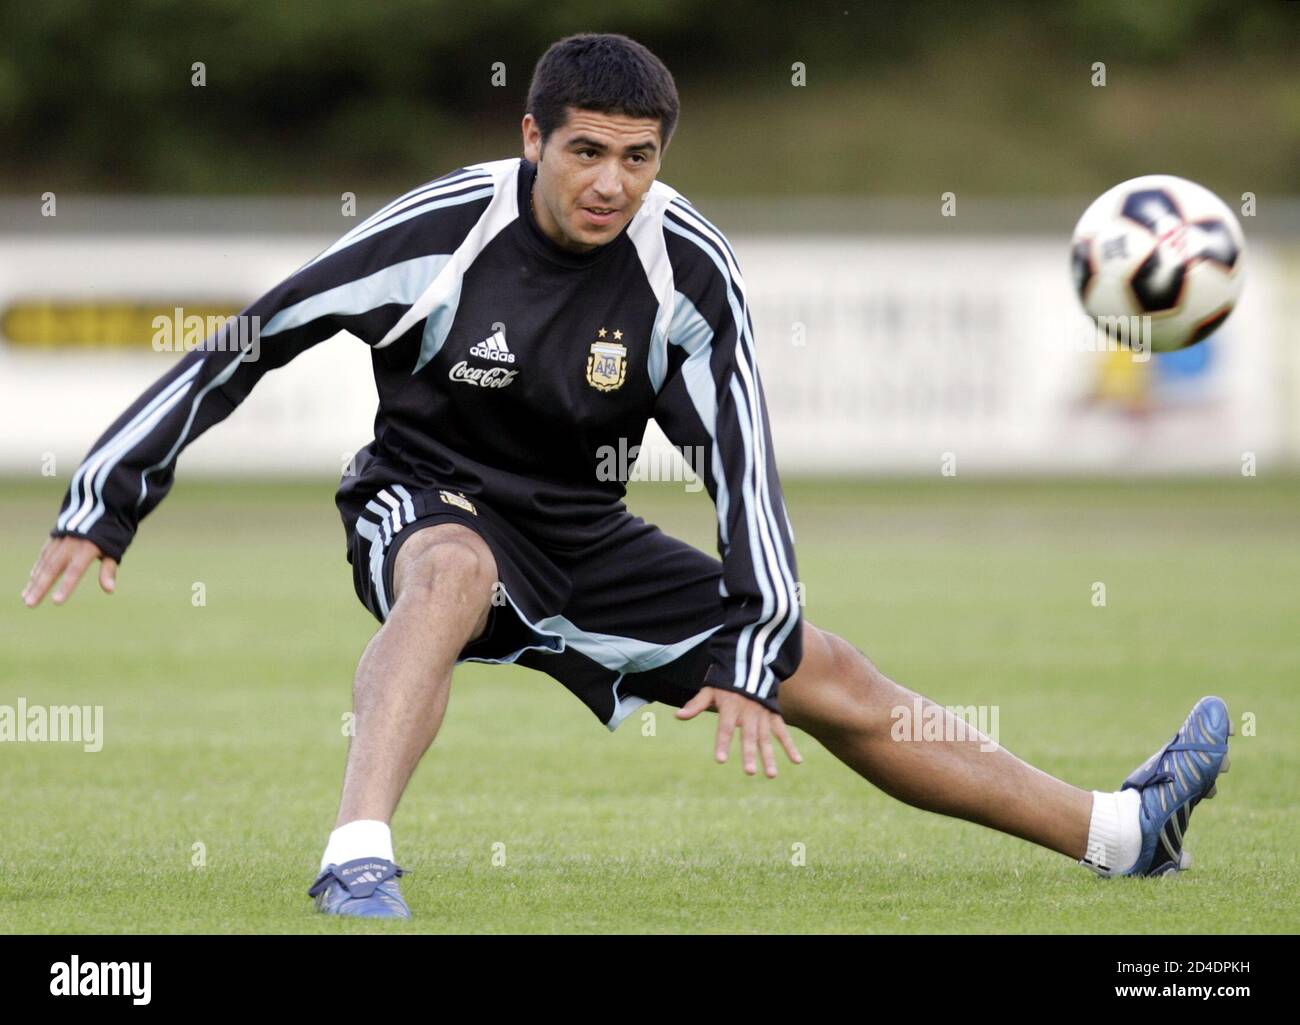 Argentina's Juan Roman Riquelme kicks the ball during a training session in  Troisdorf, June 14, 2005. Argentina will play the Confederations Cup in  Germany from June 15 to 29. REUTERS/Marcos Brindicci MBH/AA